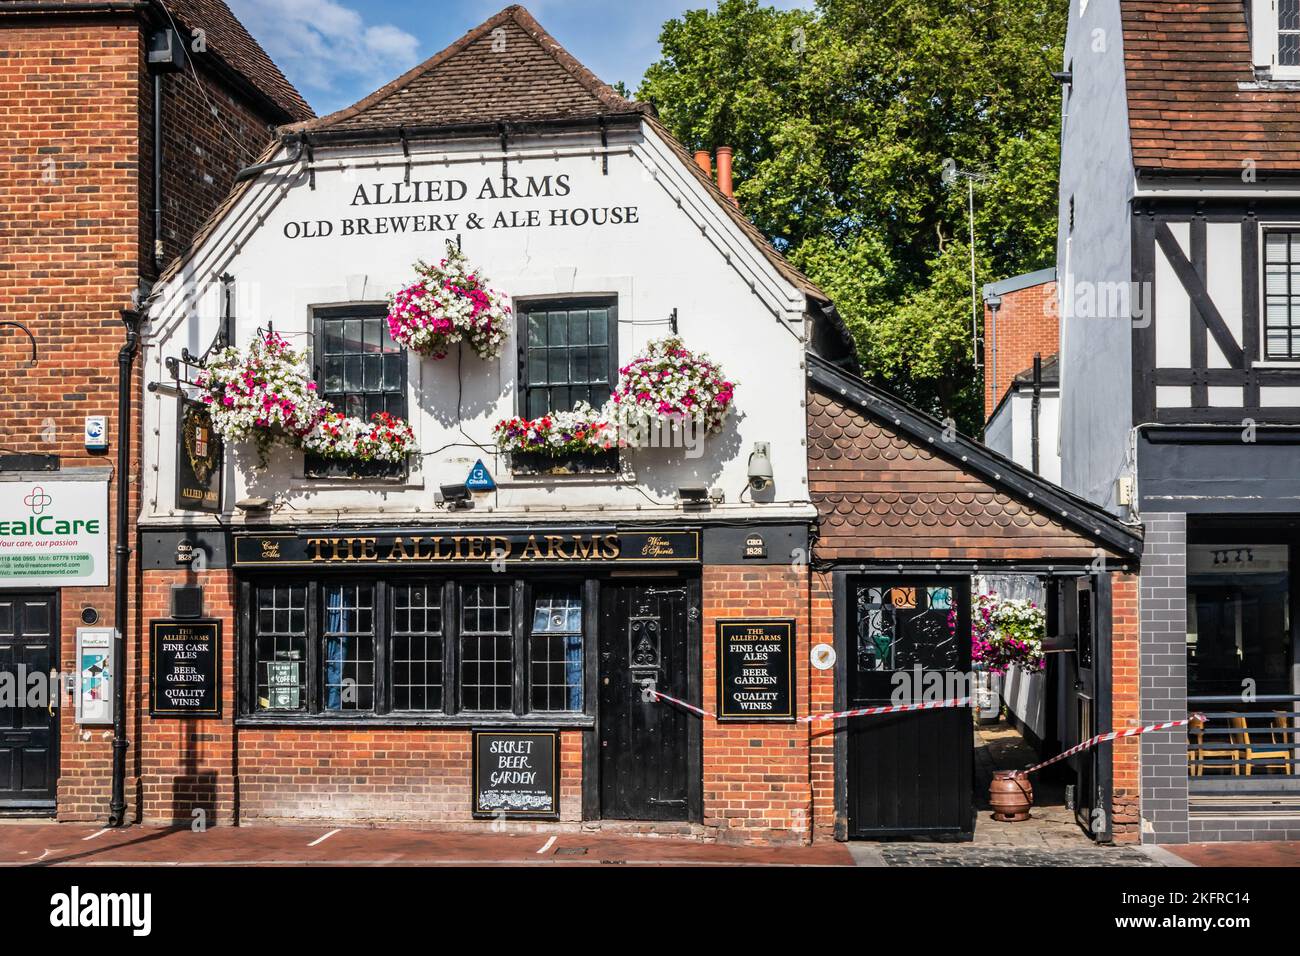 The Allied Arms old brewery and ale house, Reading, Berkshire, England Stock Photo